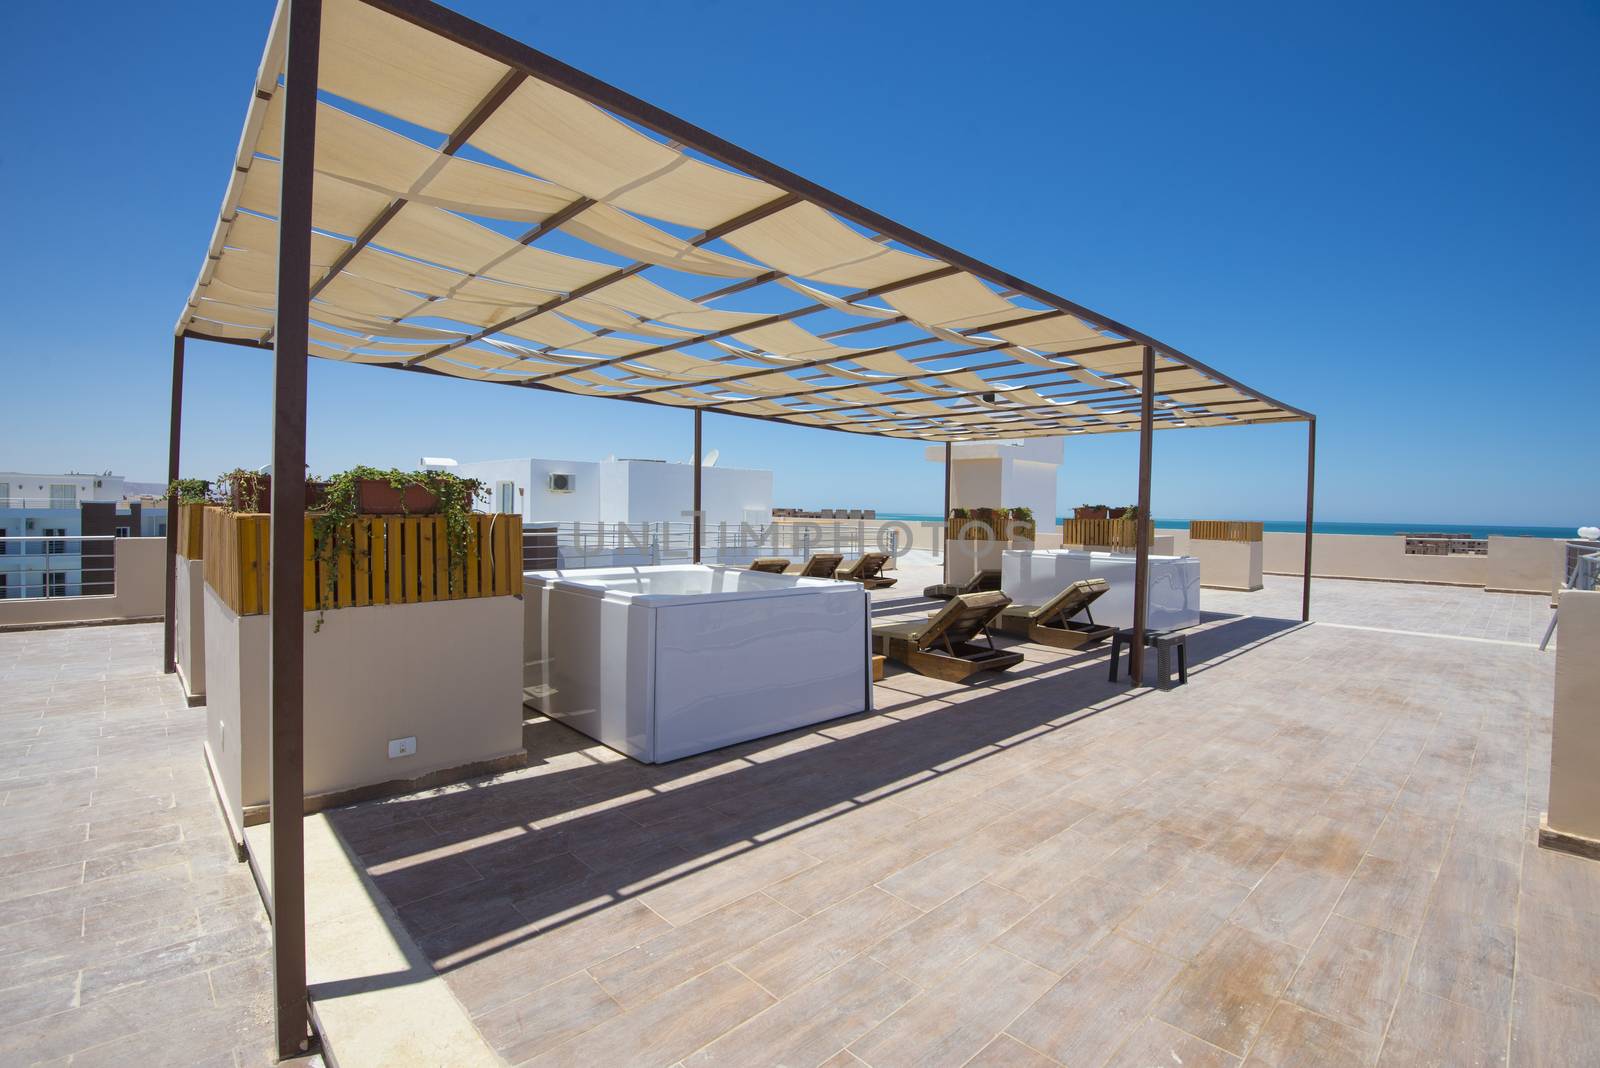 Sunbeds and hot tubs on roof terrace patio sunbathing area of luxury hotel apartment building